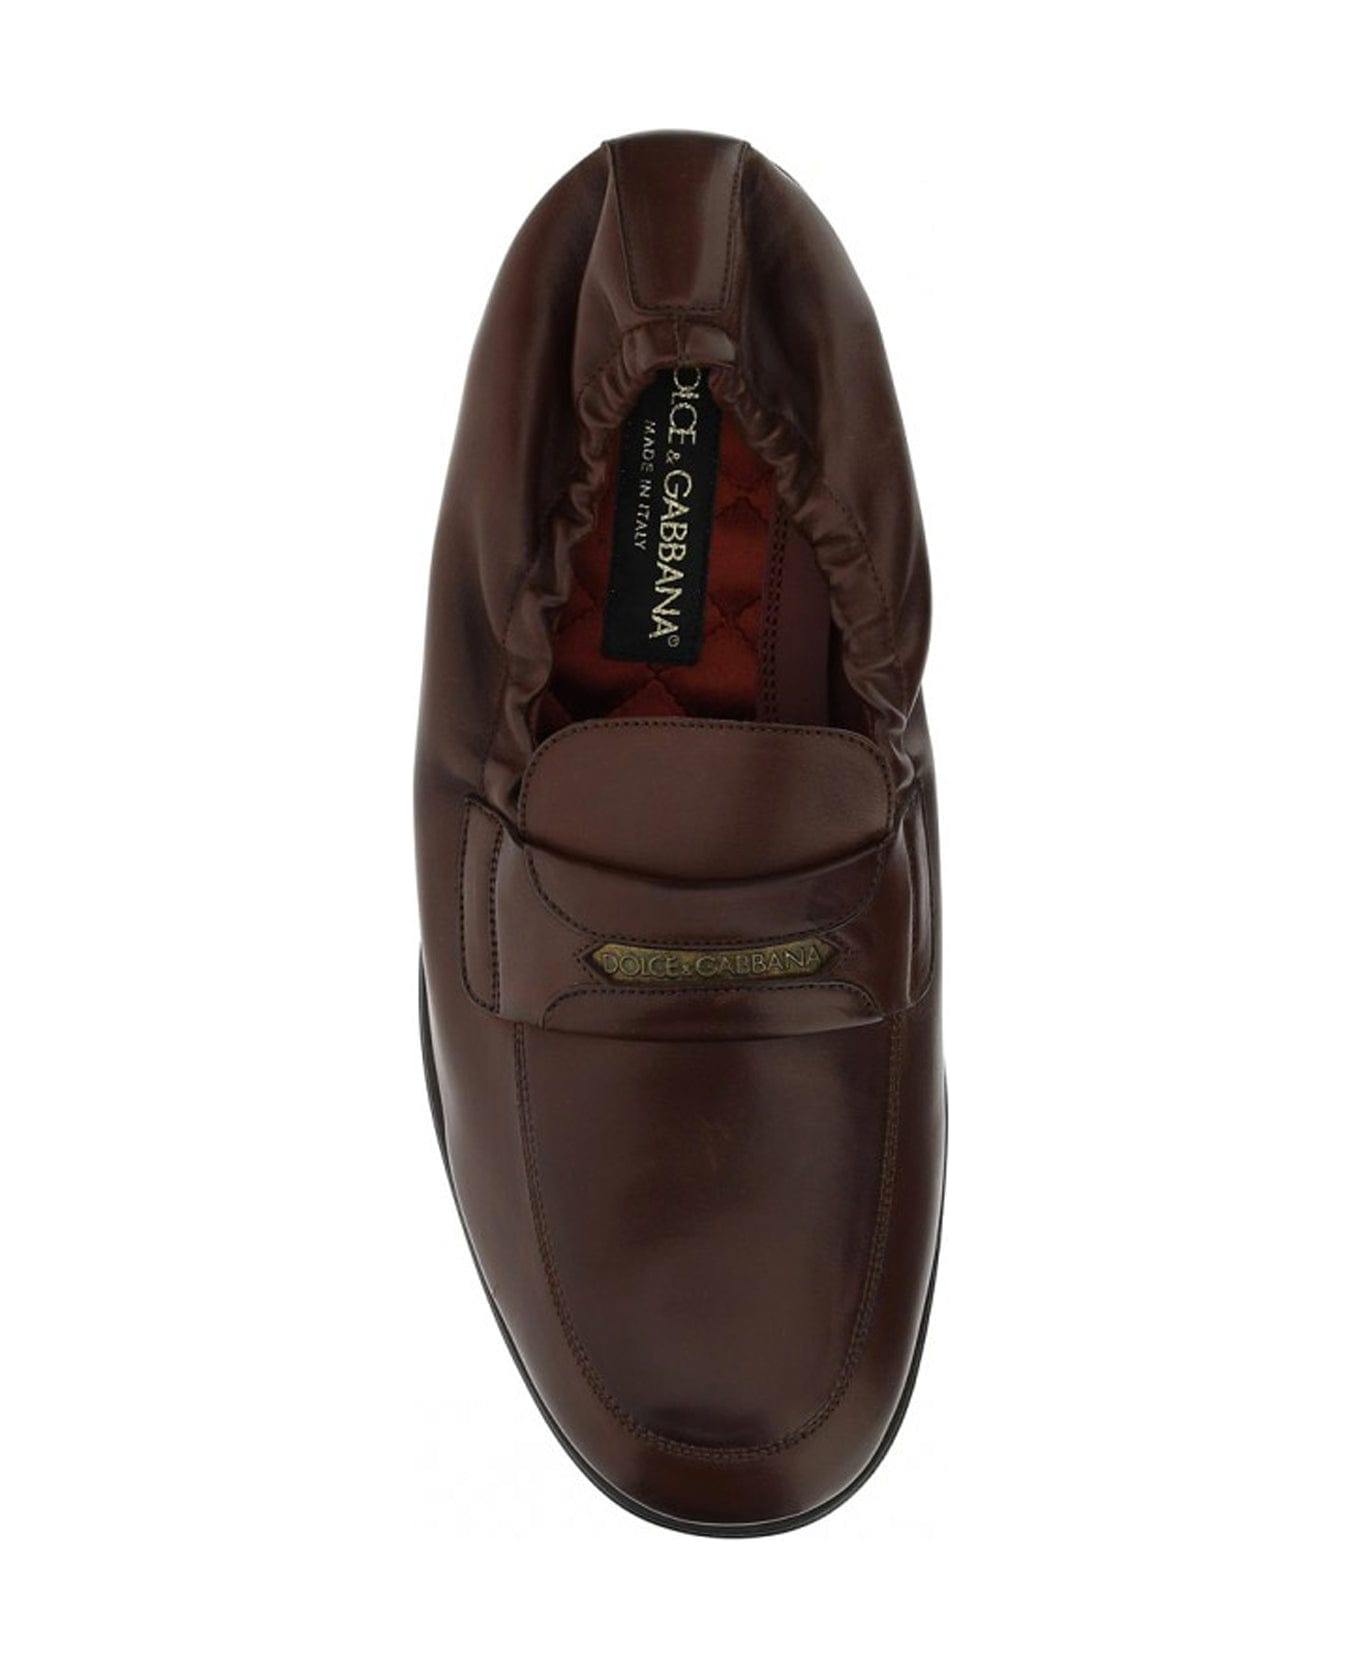 Dolce & Gabbana Leather Loafers - Brown ローファー＆デッキシューズ